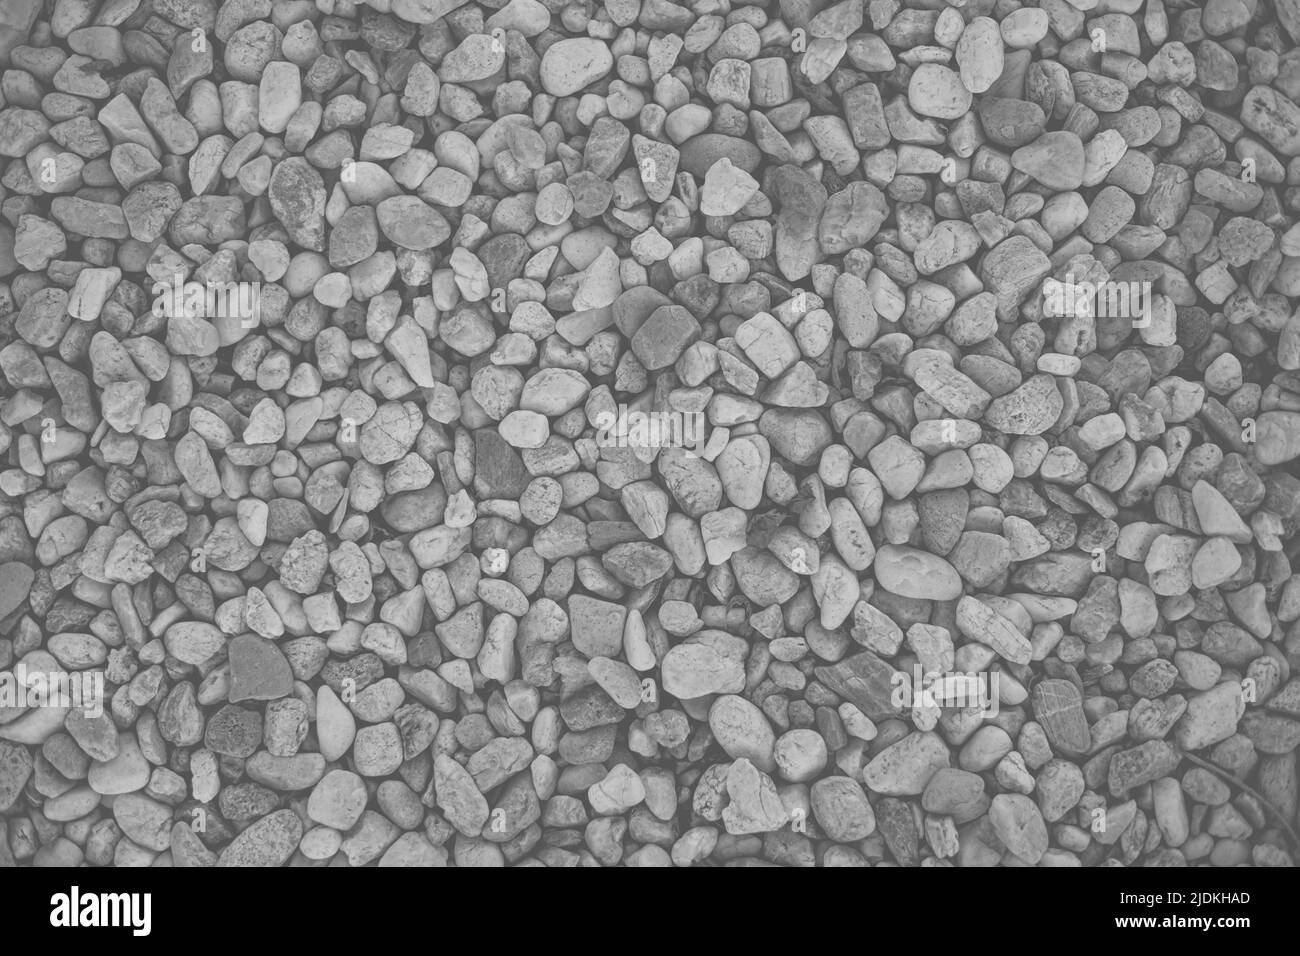 small pebble rock stones nature pattern texture for background black and white Stock Photo